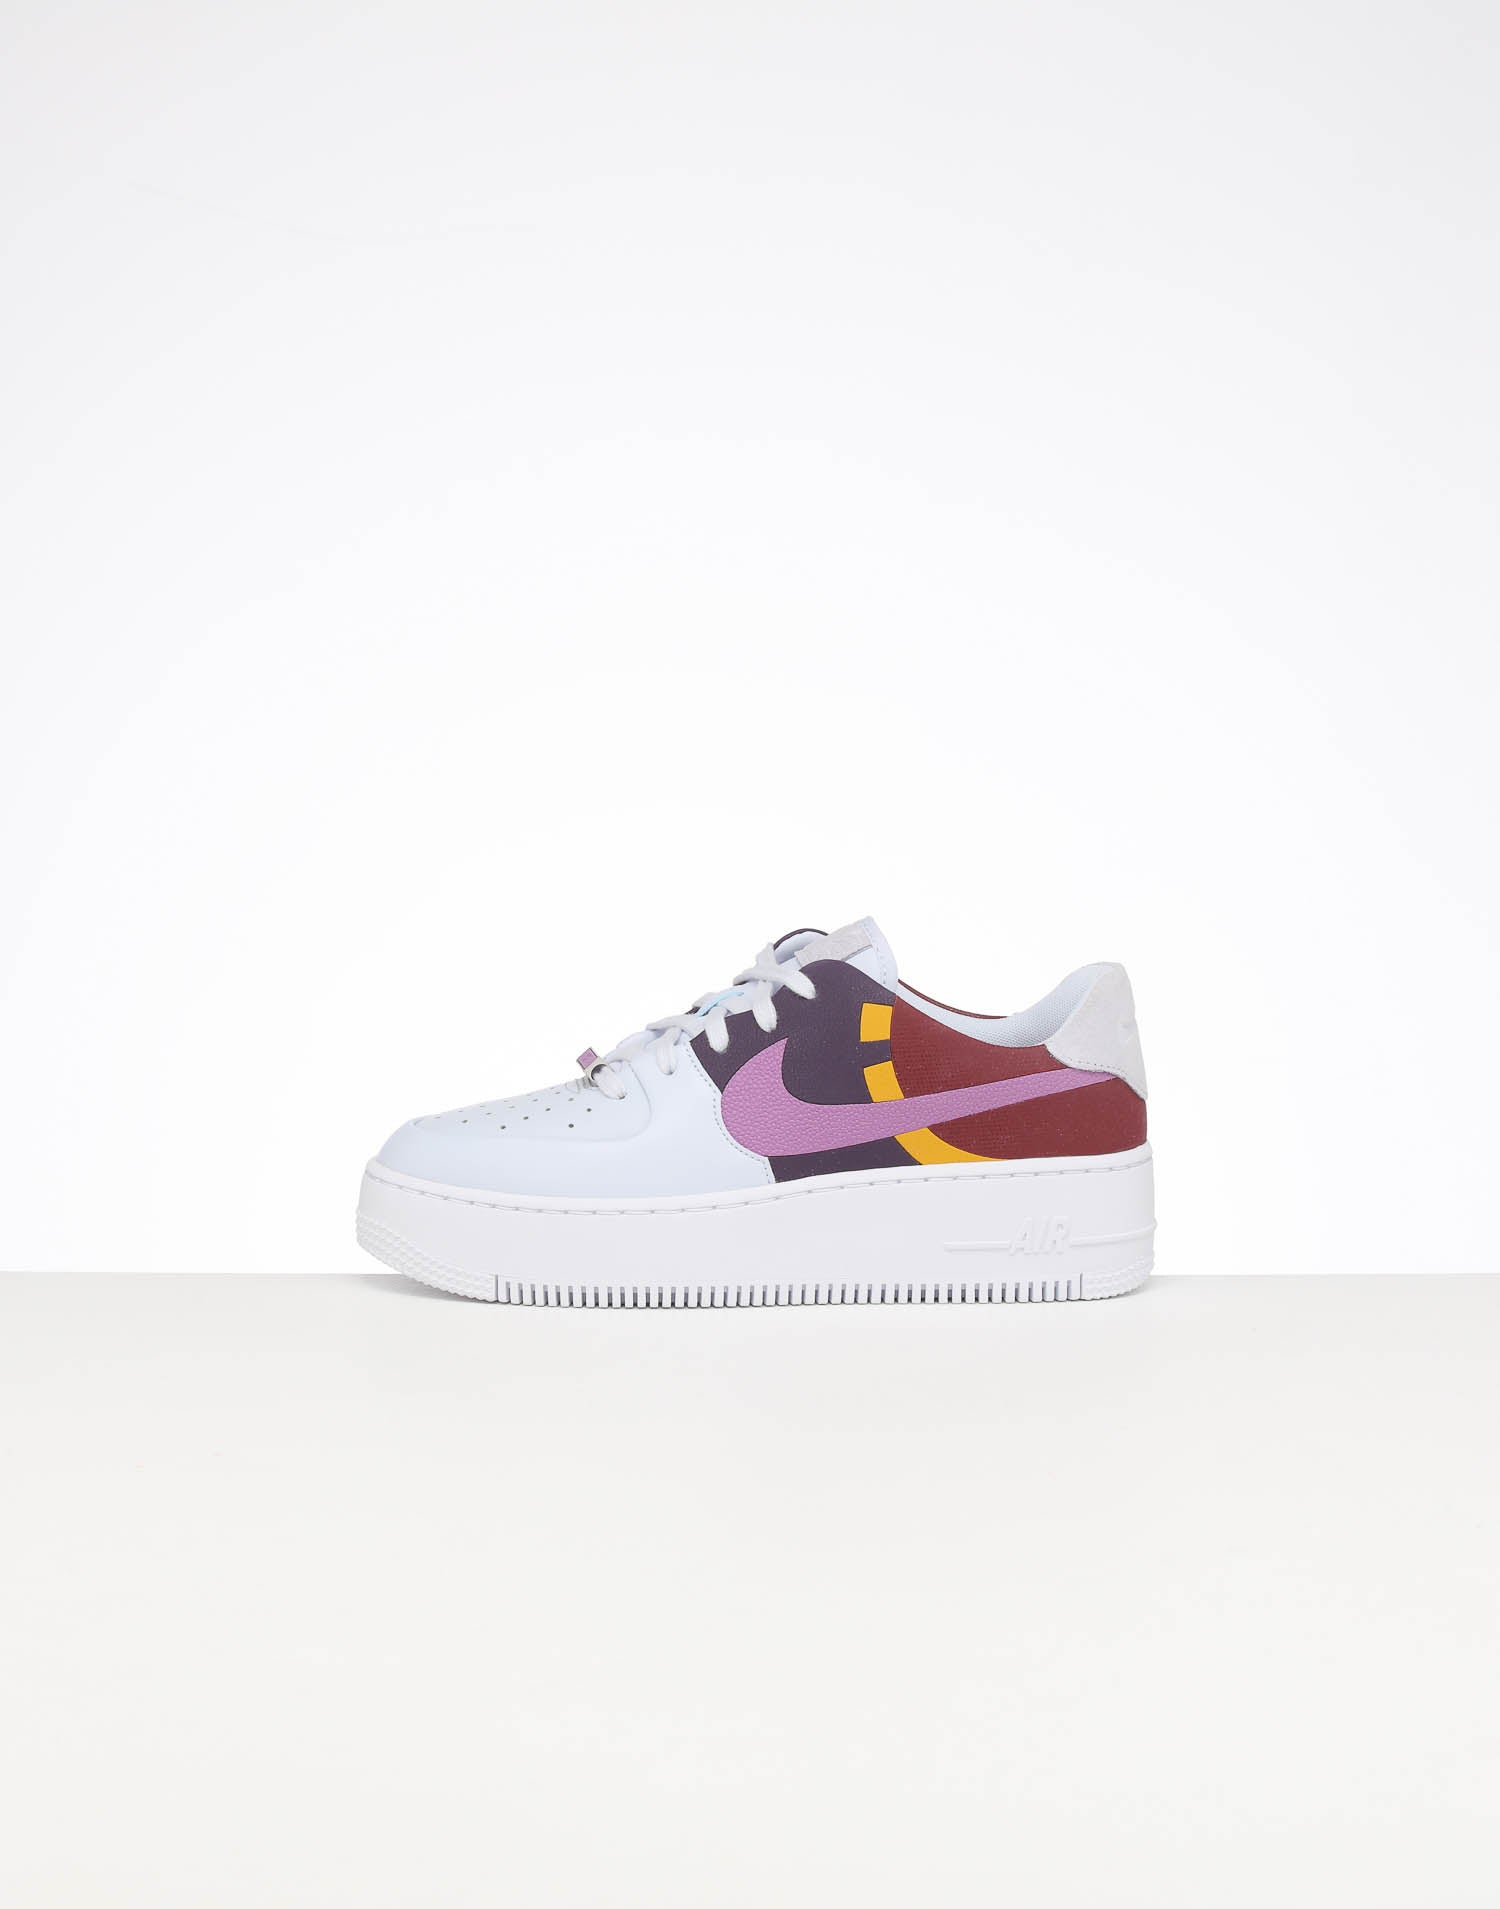 womens 5.5 air force ones